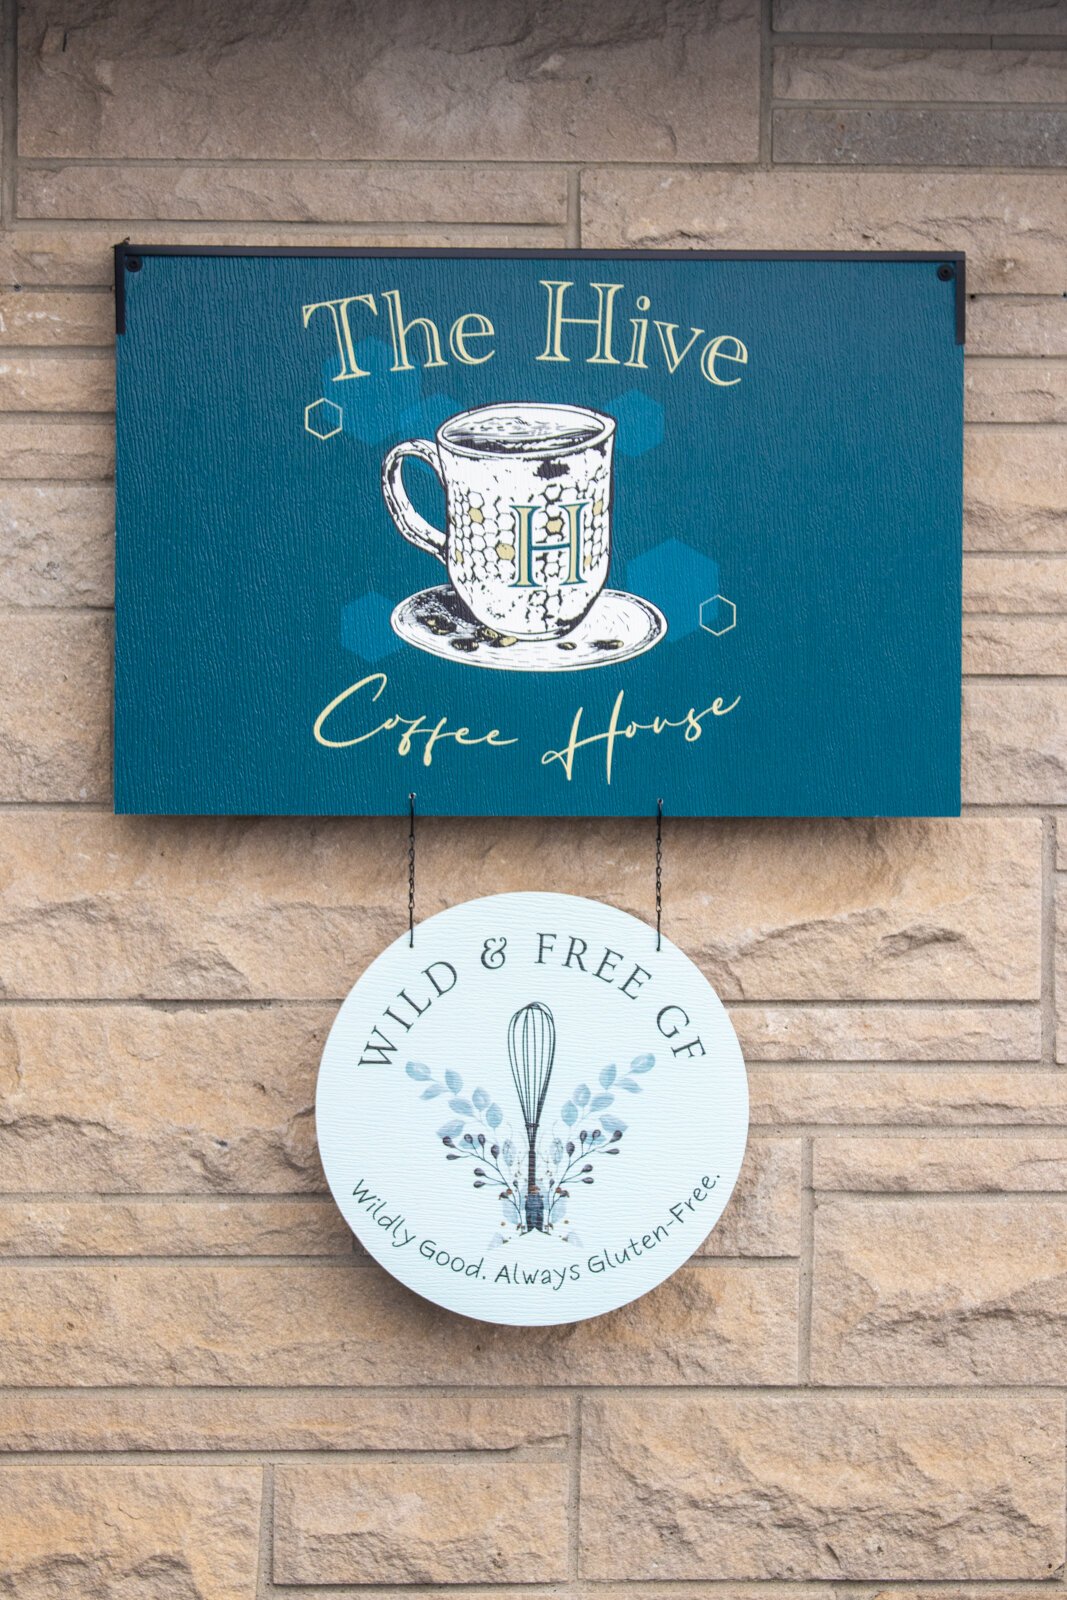 The Hive Coffee Shop and Wild & Free Gluten Free Bakery are located at 7120 Homestead Road, Fort Wayne, IN 46814.